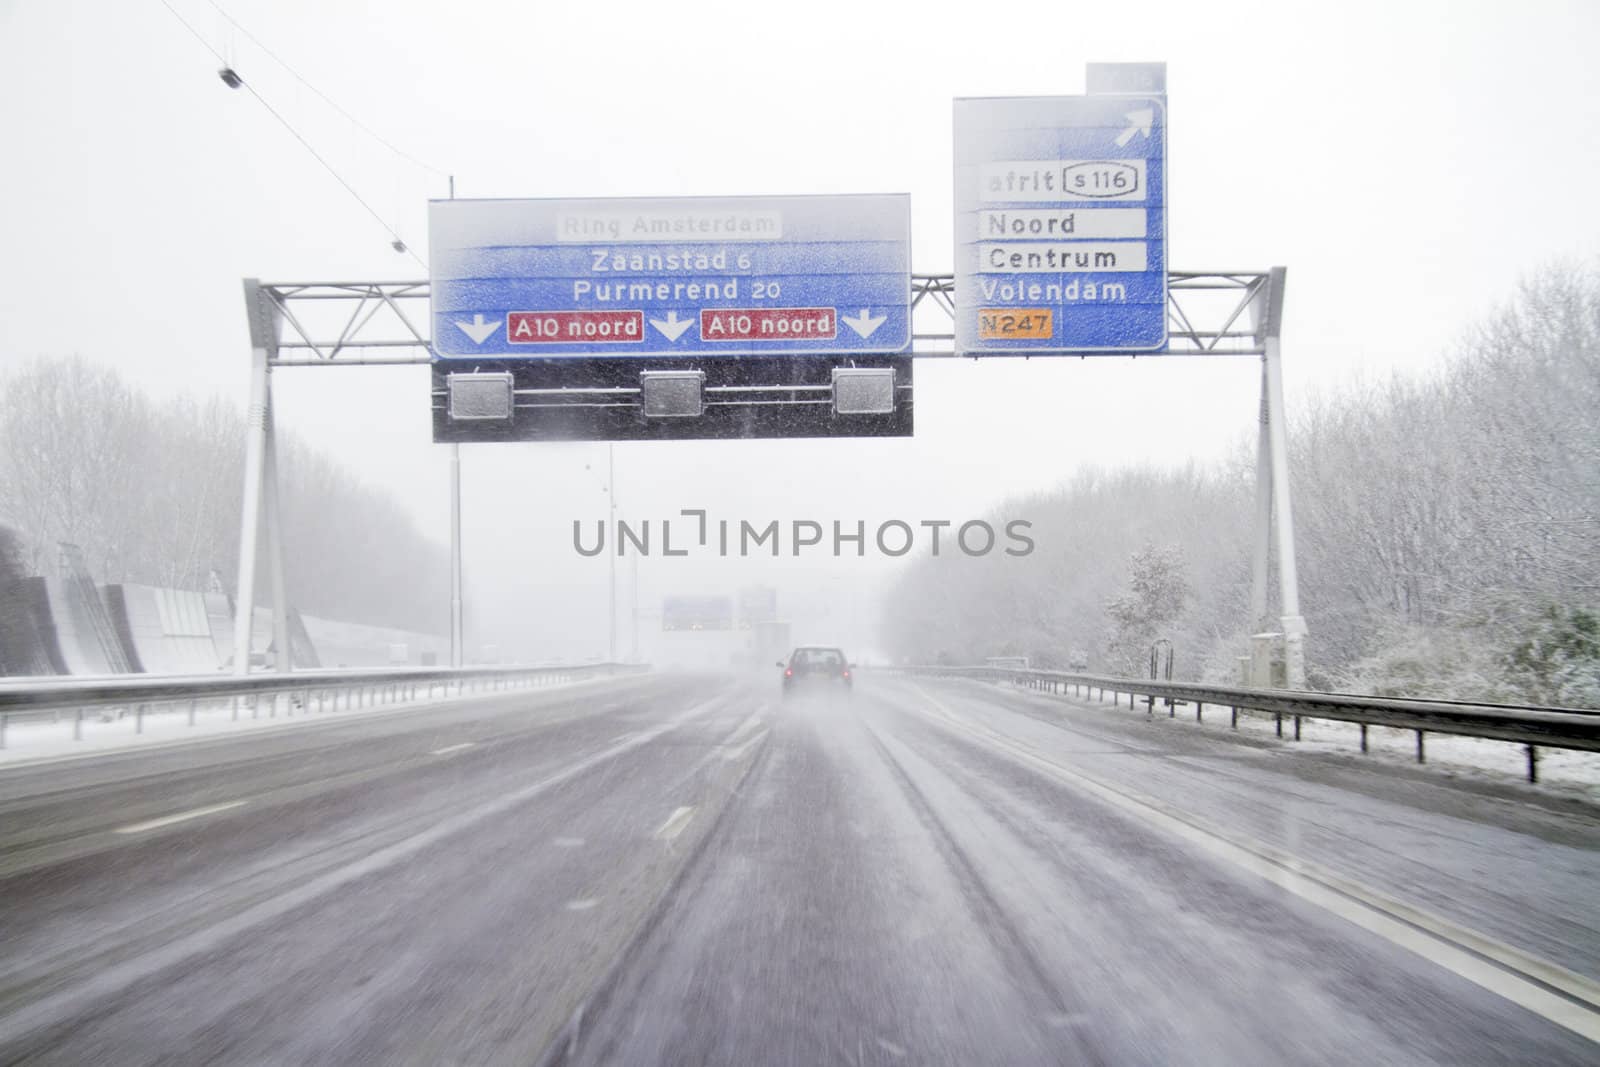 driving in a snowstorm on the highway in the Netherlands by devy